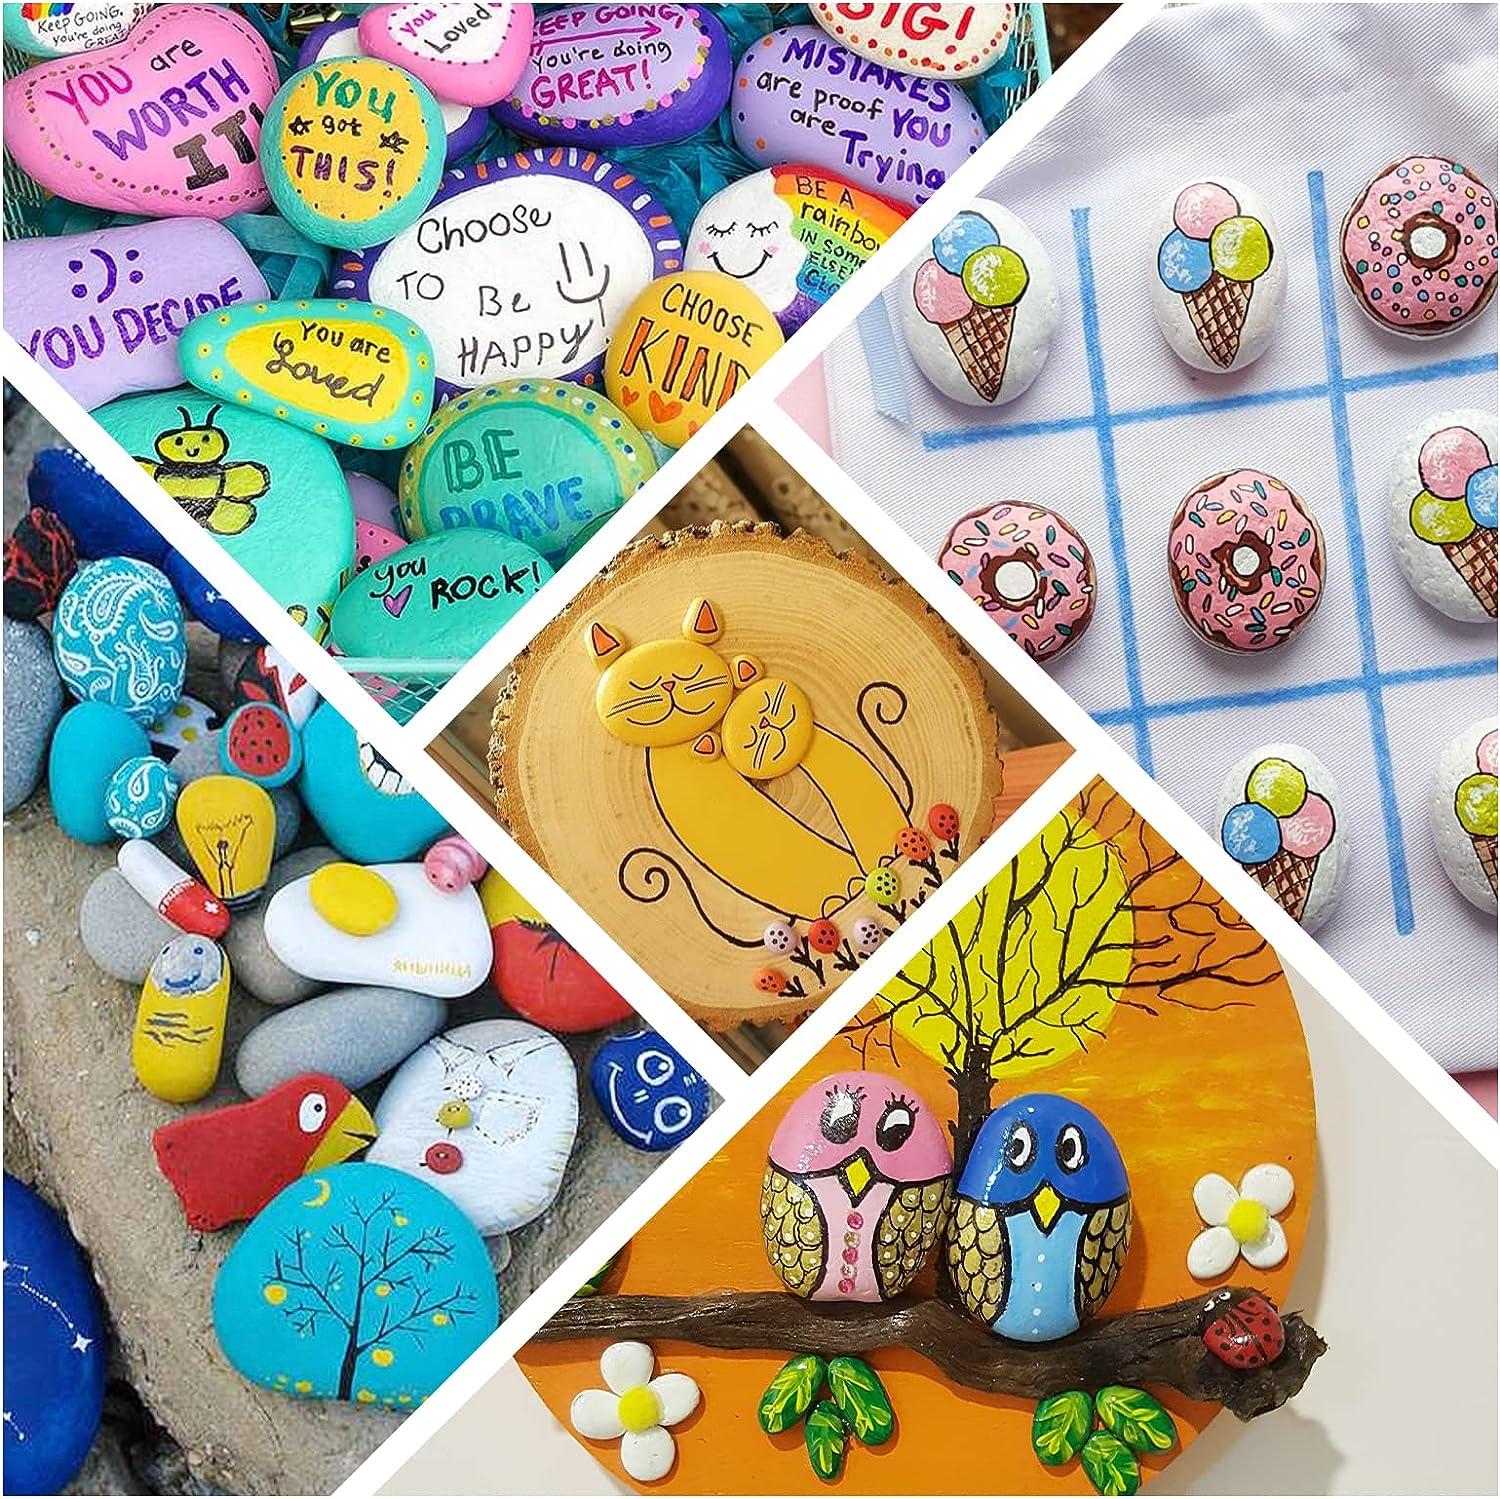 Simetufy 35 Pcs Large Painting Rocks, River Rocks for Painting, 2-3 Flat  Rocks for DIY Arts, Hand Selected Smooth Stones for DIY Crafts